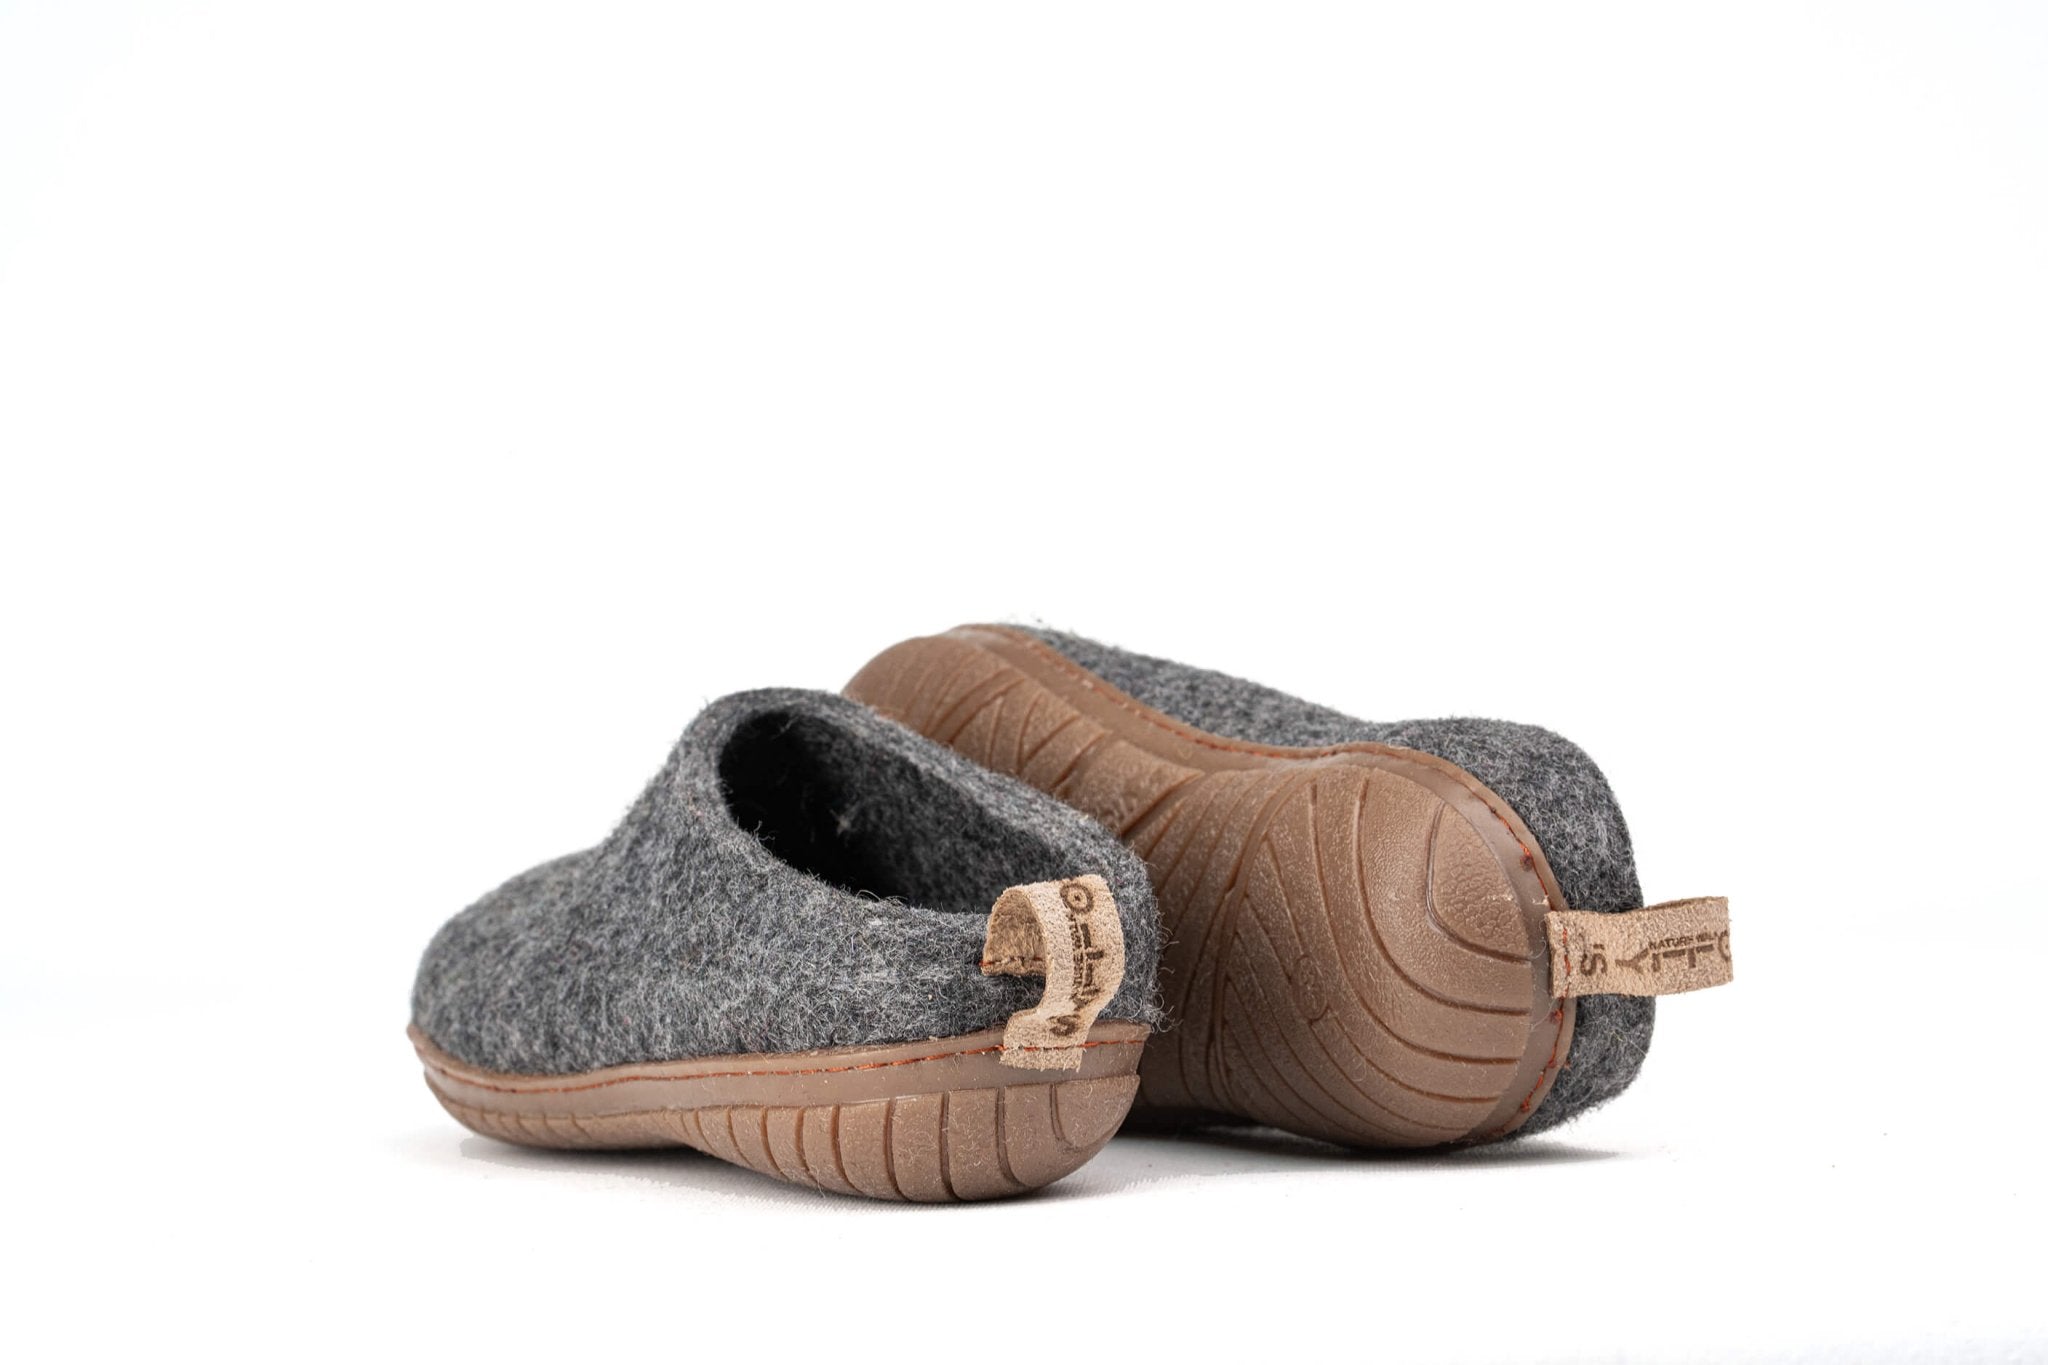 Outdoor Open Heel Slippers With Rubber Sole - Charcoal - Woollyes